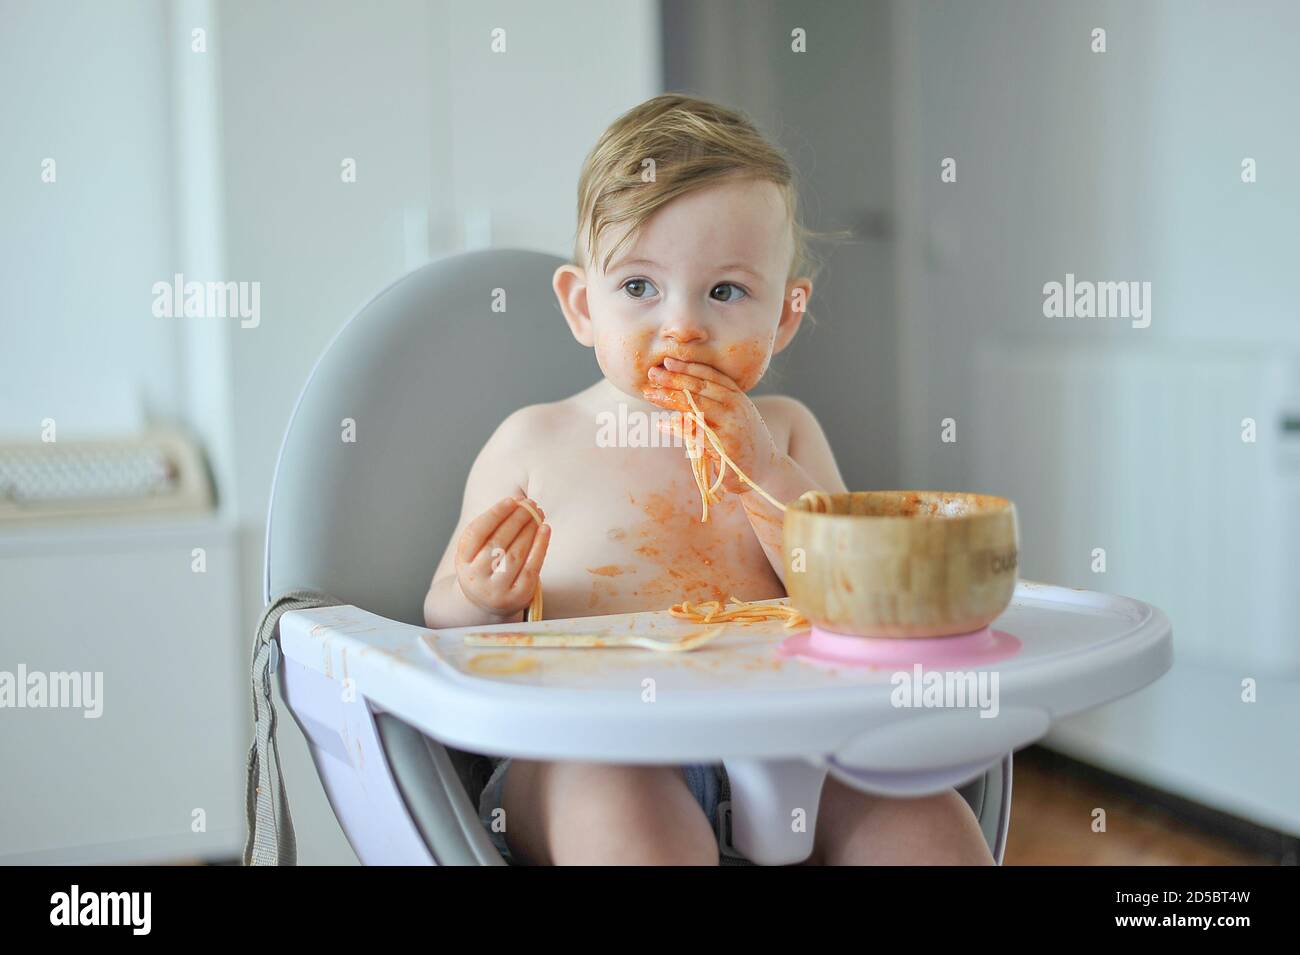 Baby eating pasta sitting on high chair Stock Photo